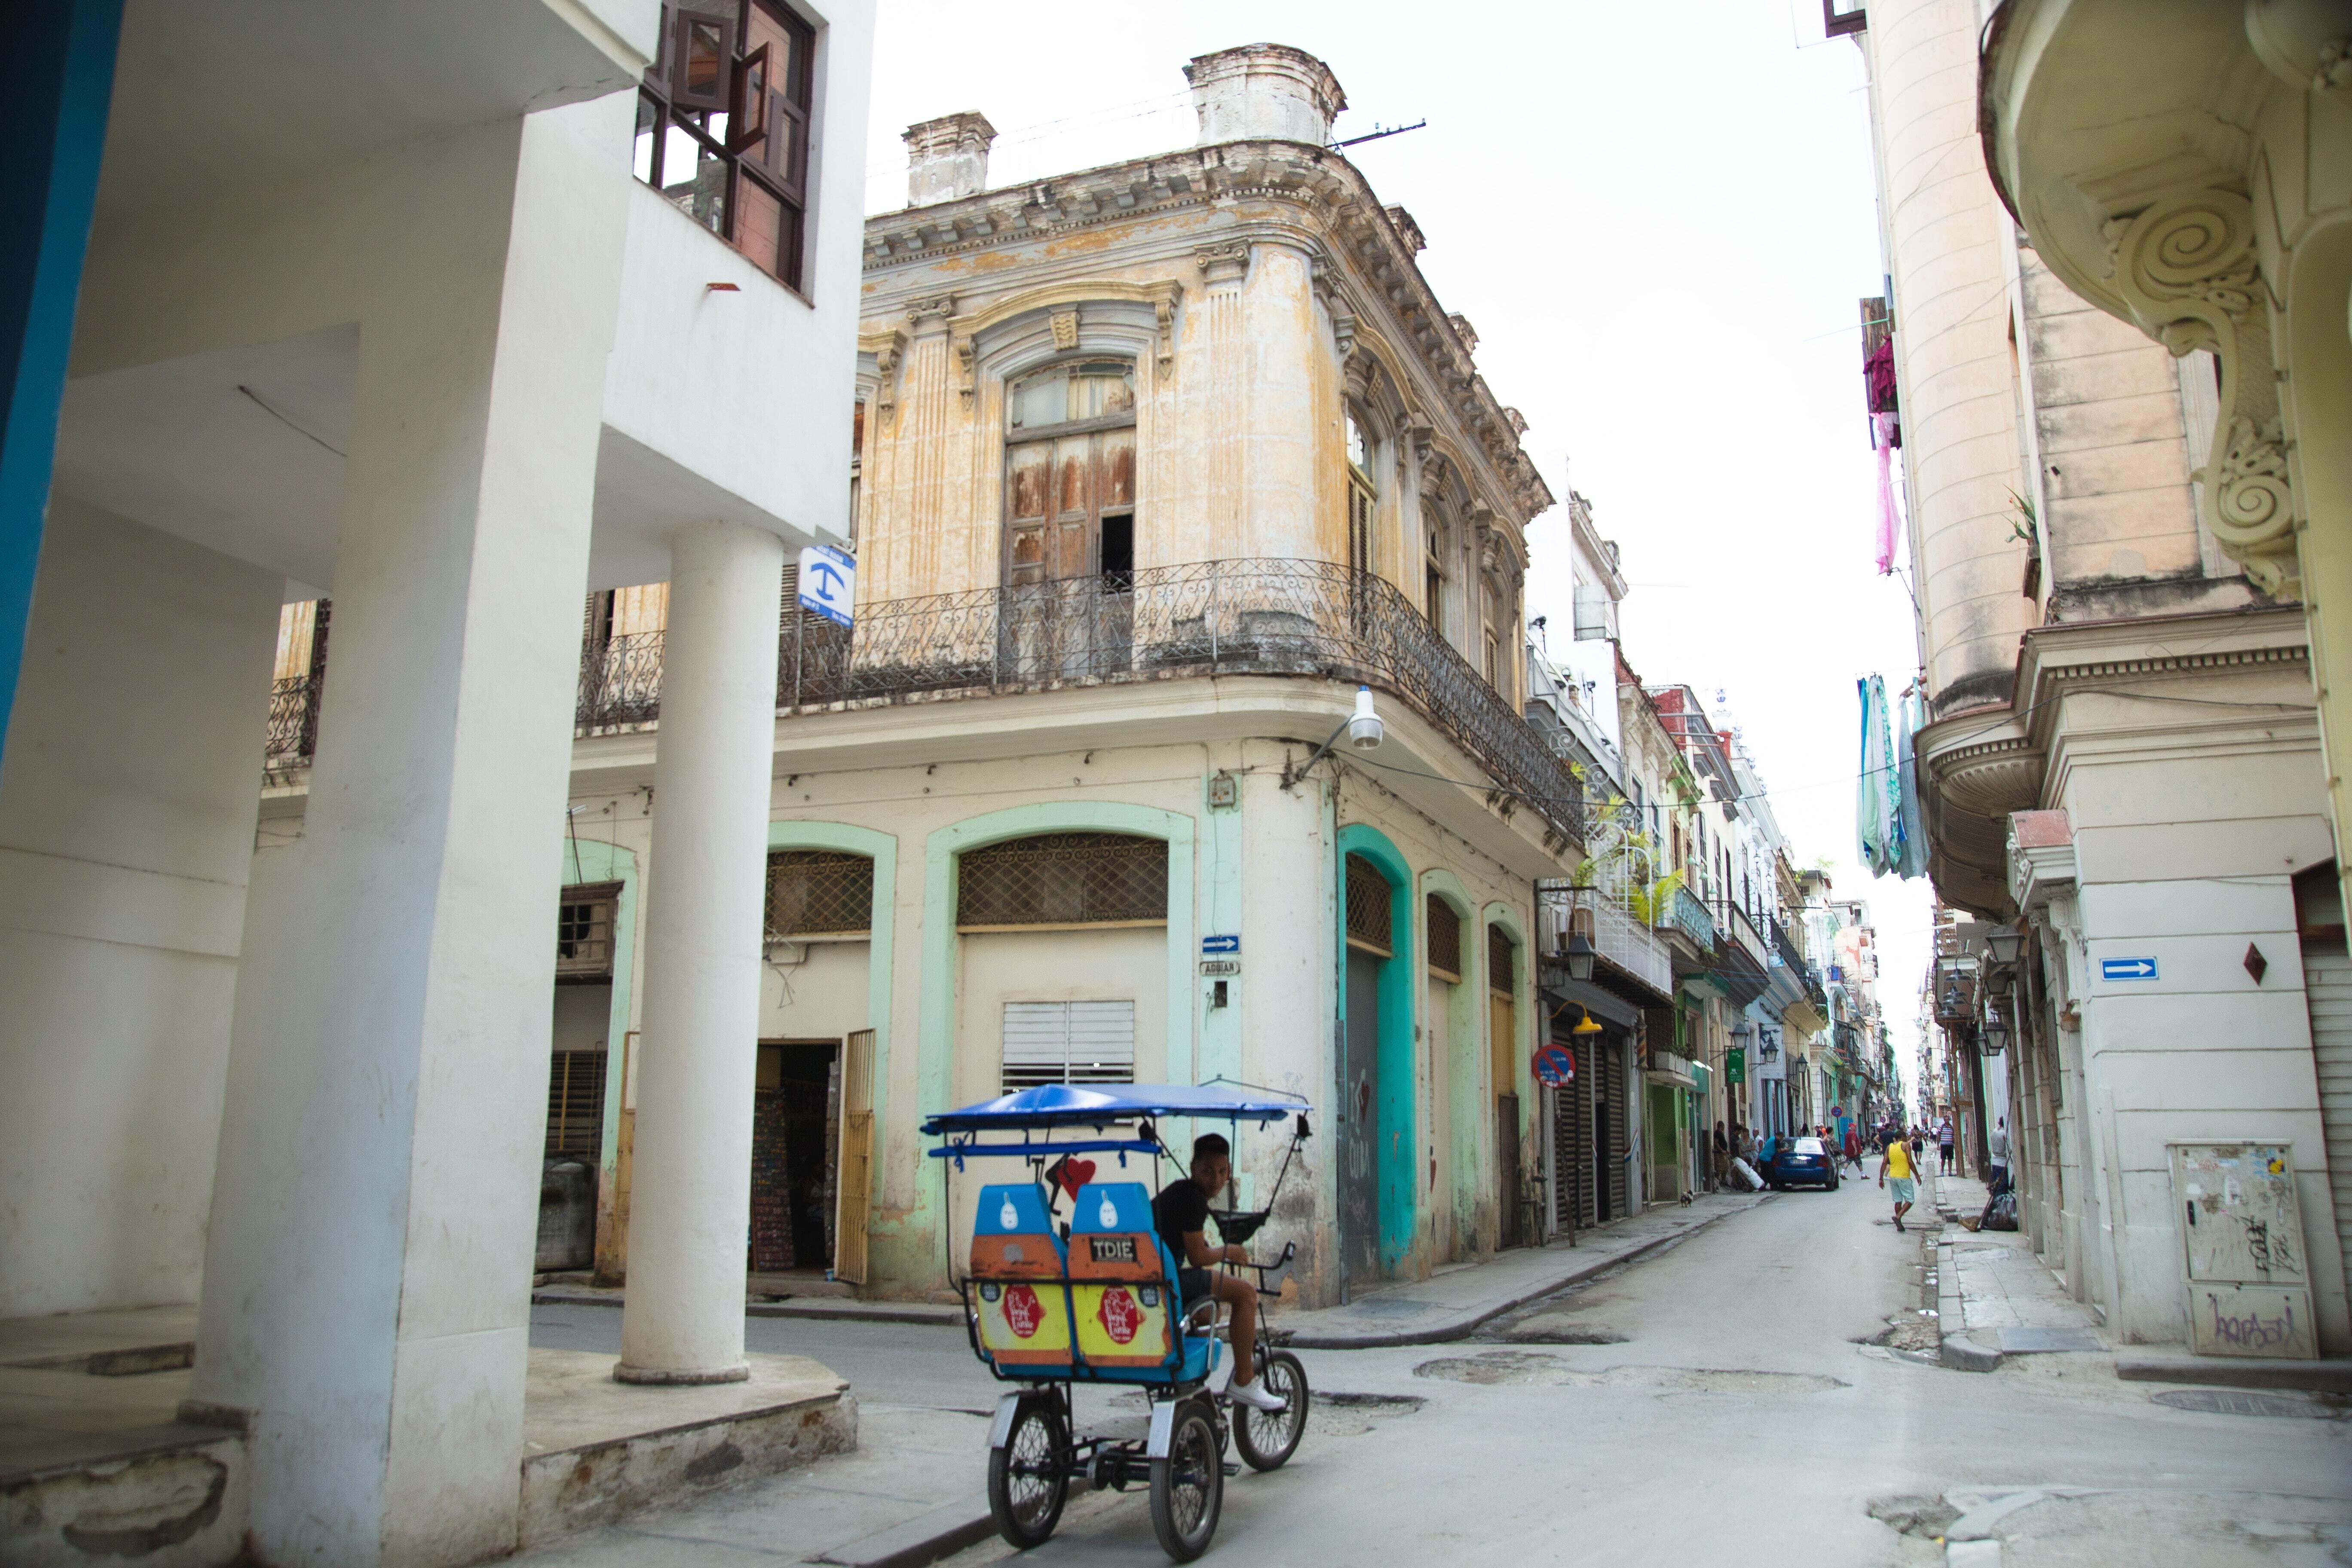 Visa Waiver Program: Ineligibility After Visiting Cuba